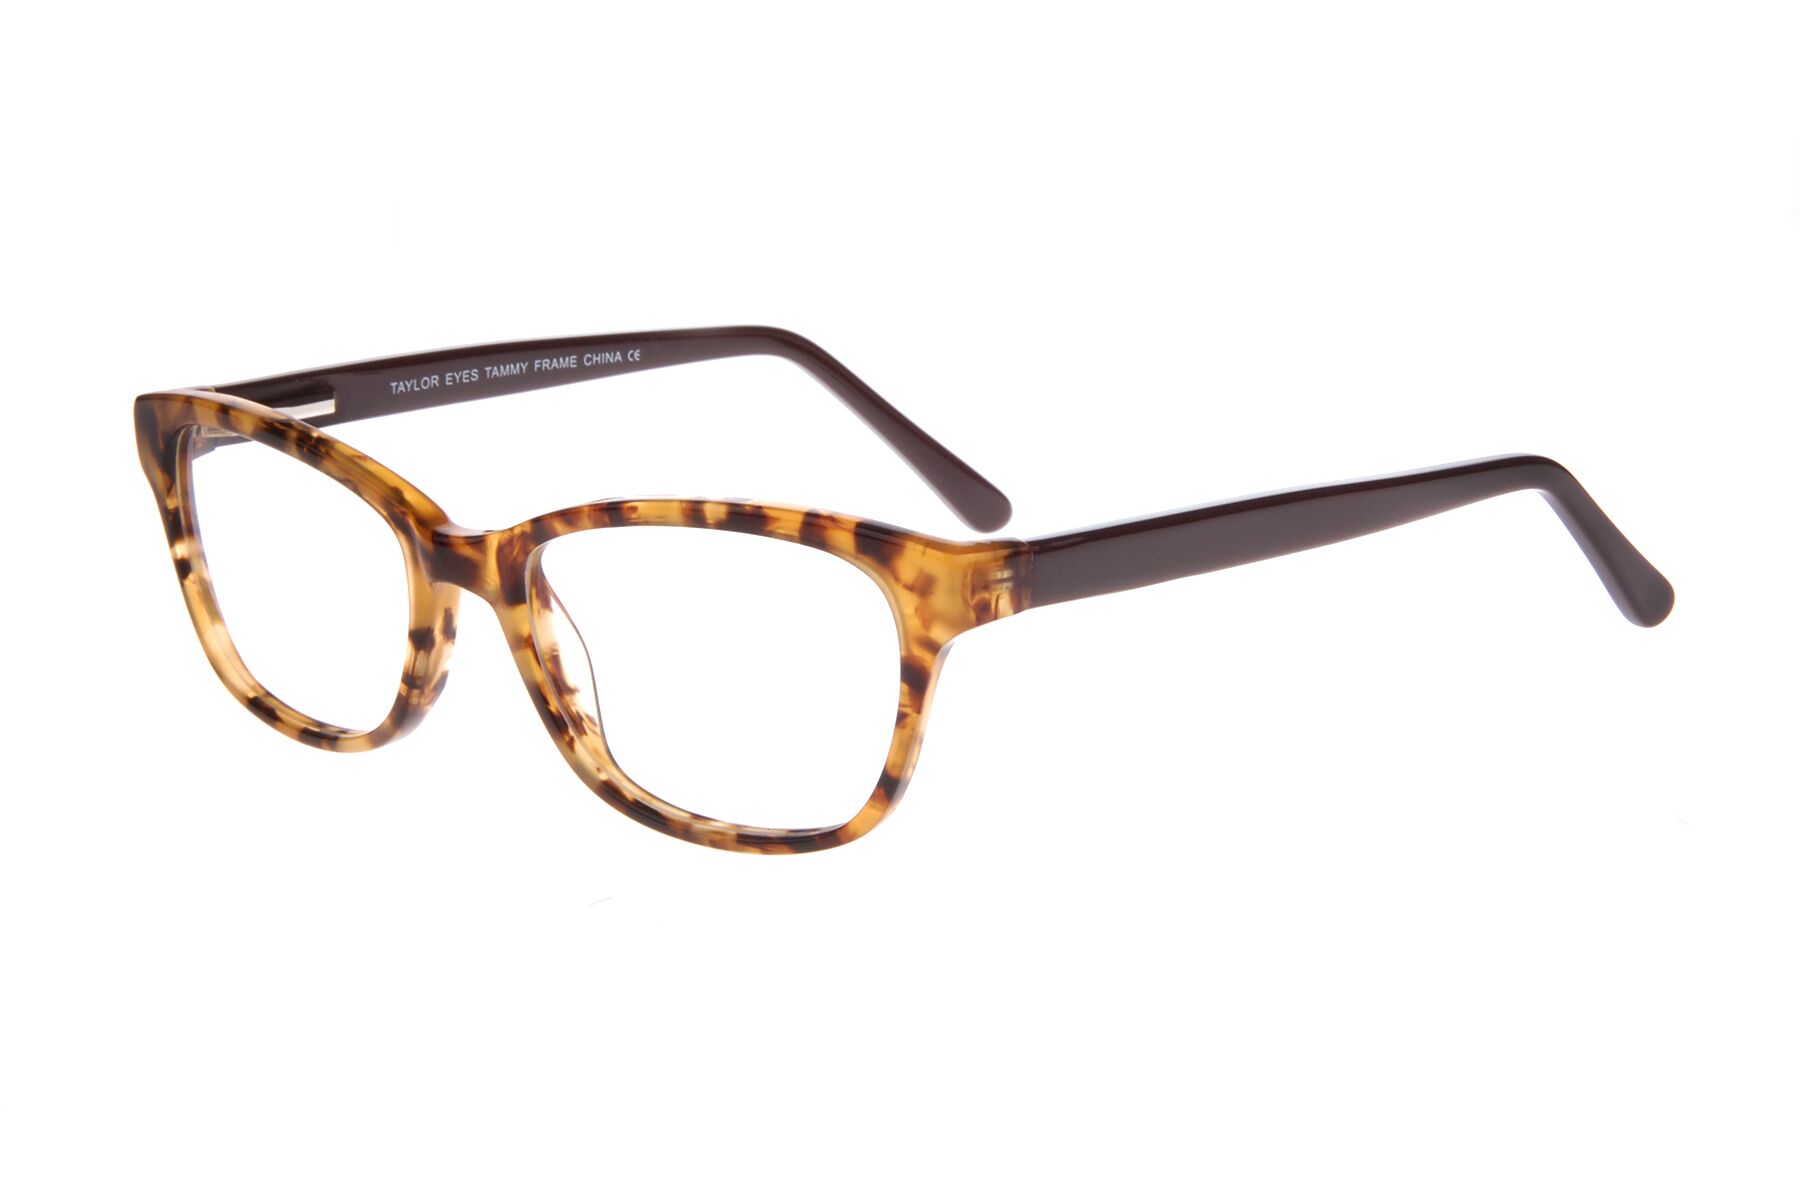 Taylor Eyes Tammy is available at SpecsToGo-Eyeglasses and Sunglasses